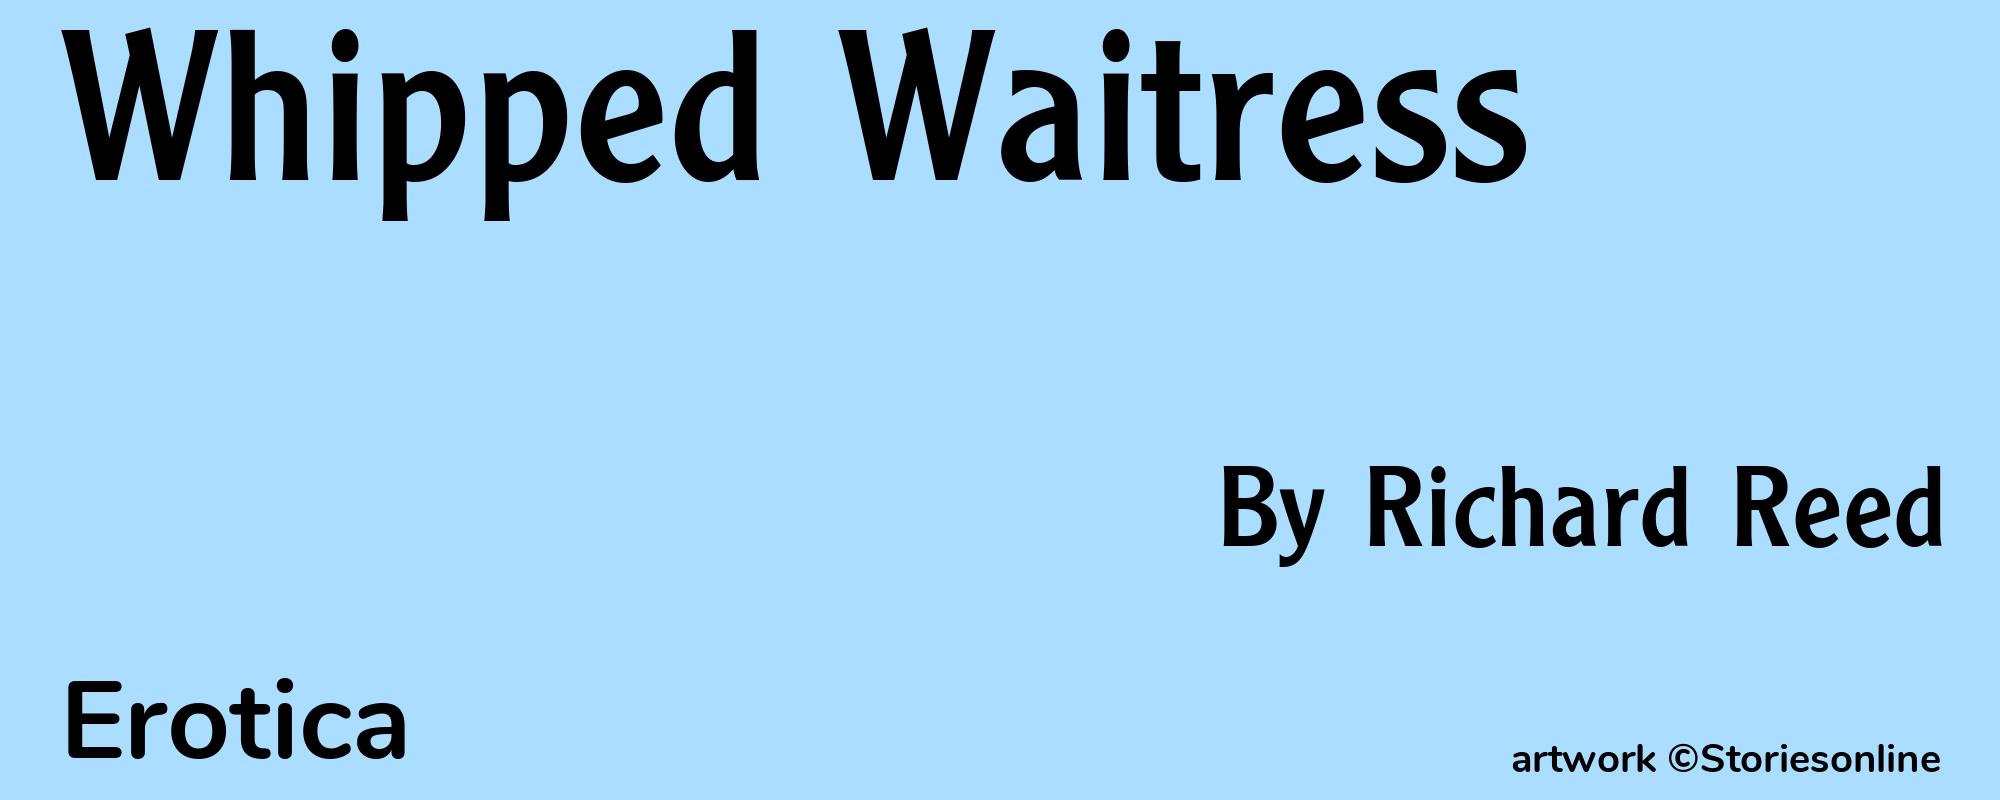 Whipped Waitress - Cover